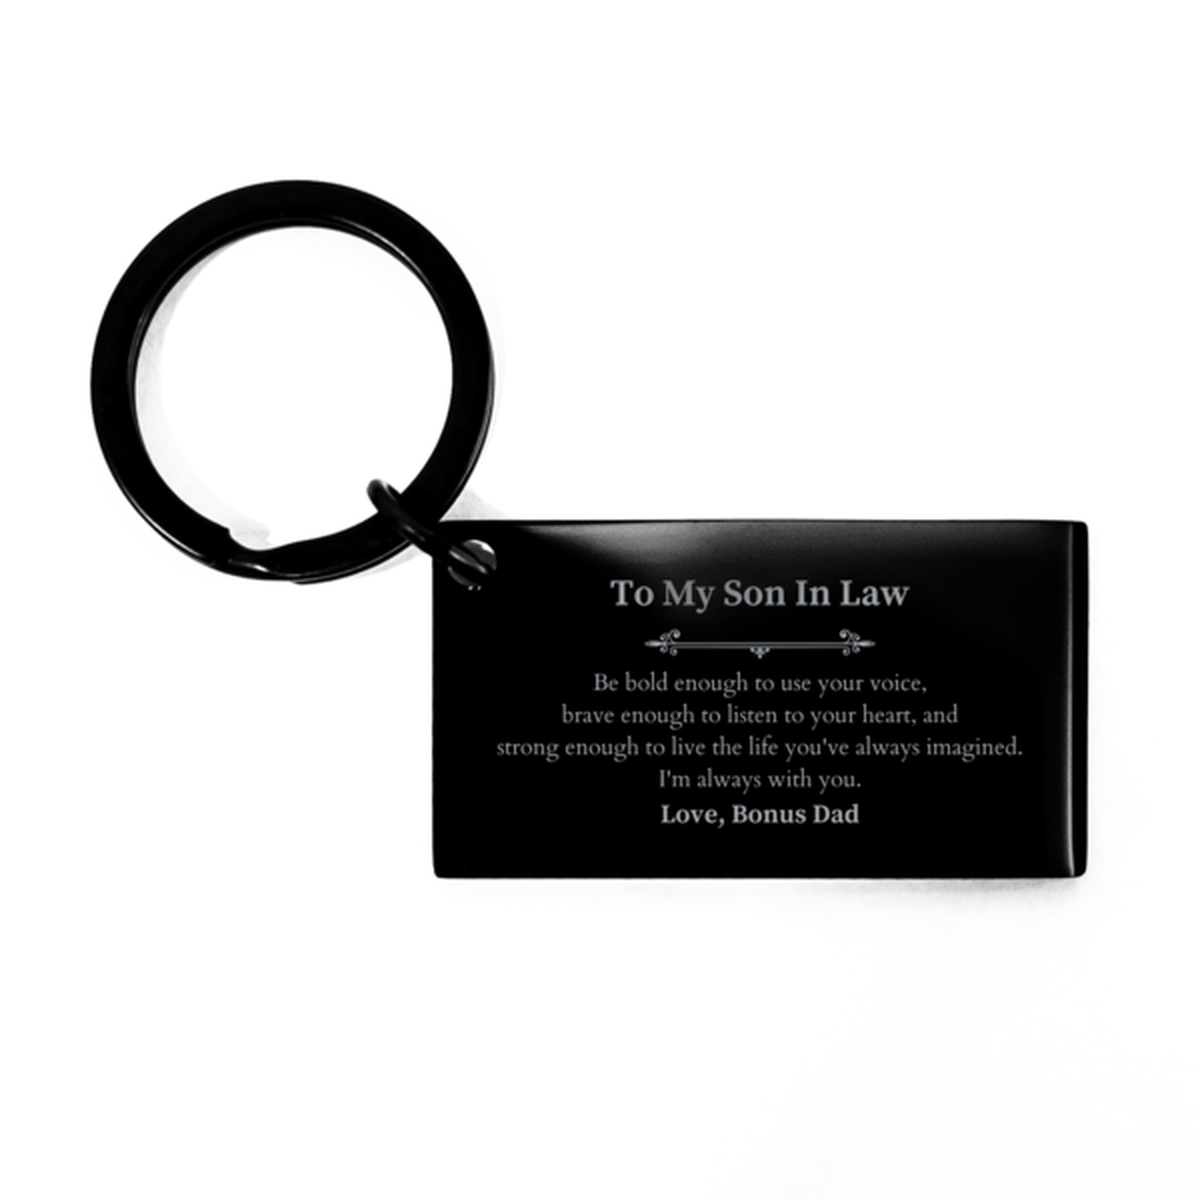 Keepsake Son In Law Keychain Gift Idea Graduation Christmas Birthday Son In Law from Bonus Dad, Son In Law Be bold enough to use your voice, brave enough to listen to your heart. Love, Bonus Dad